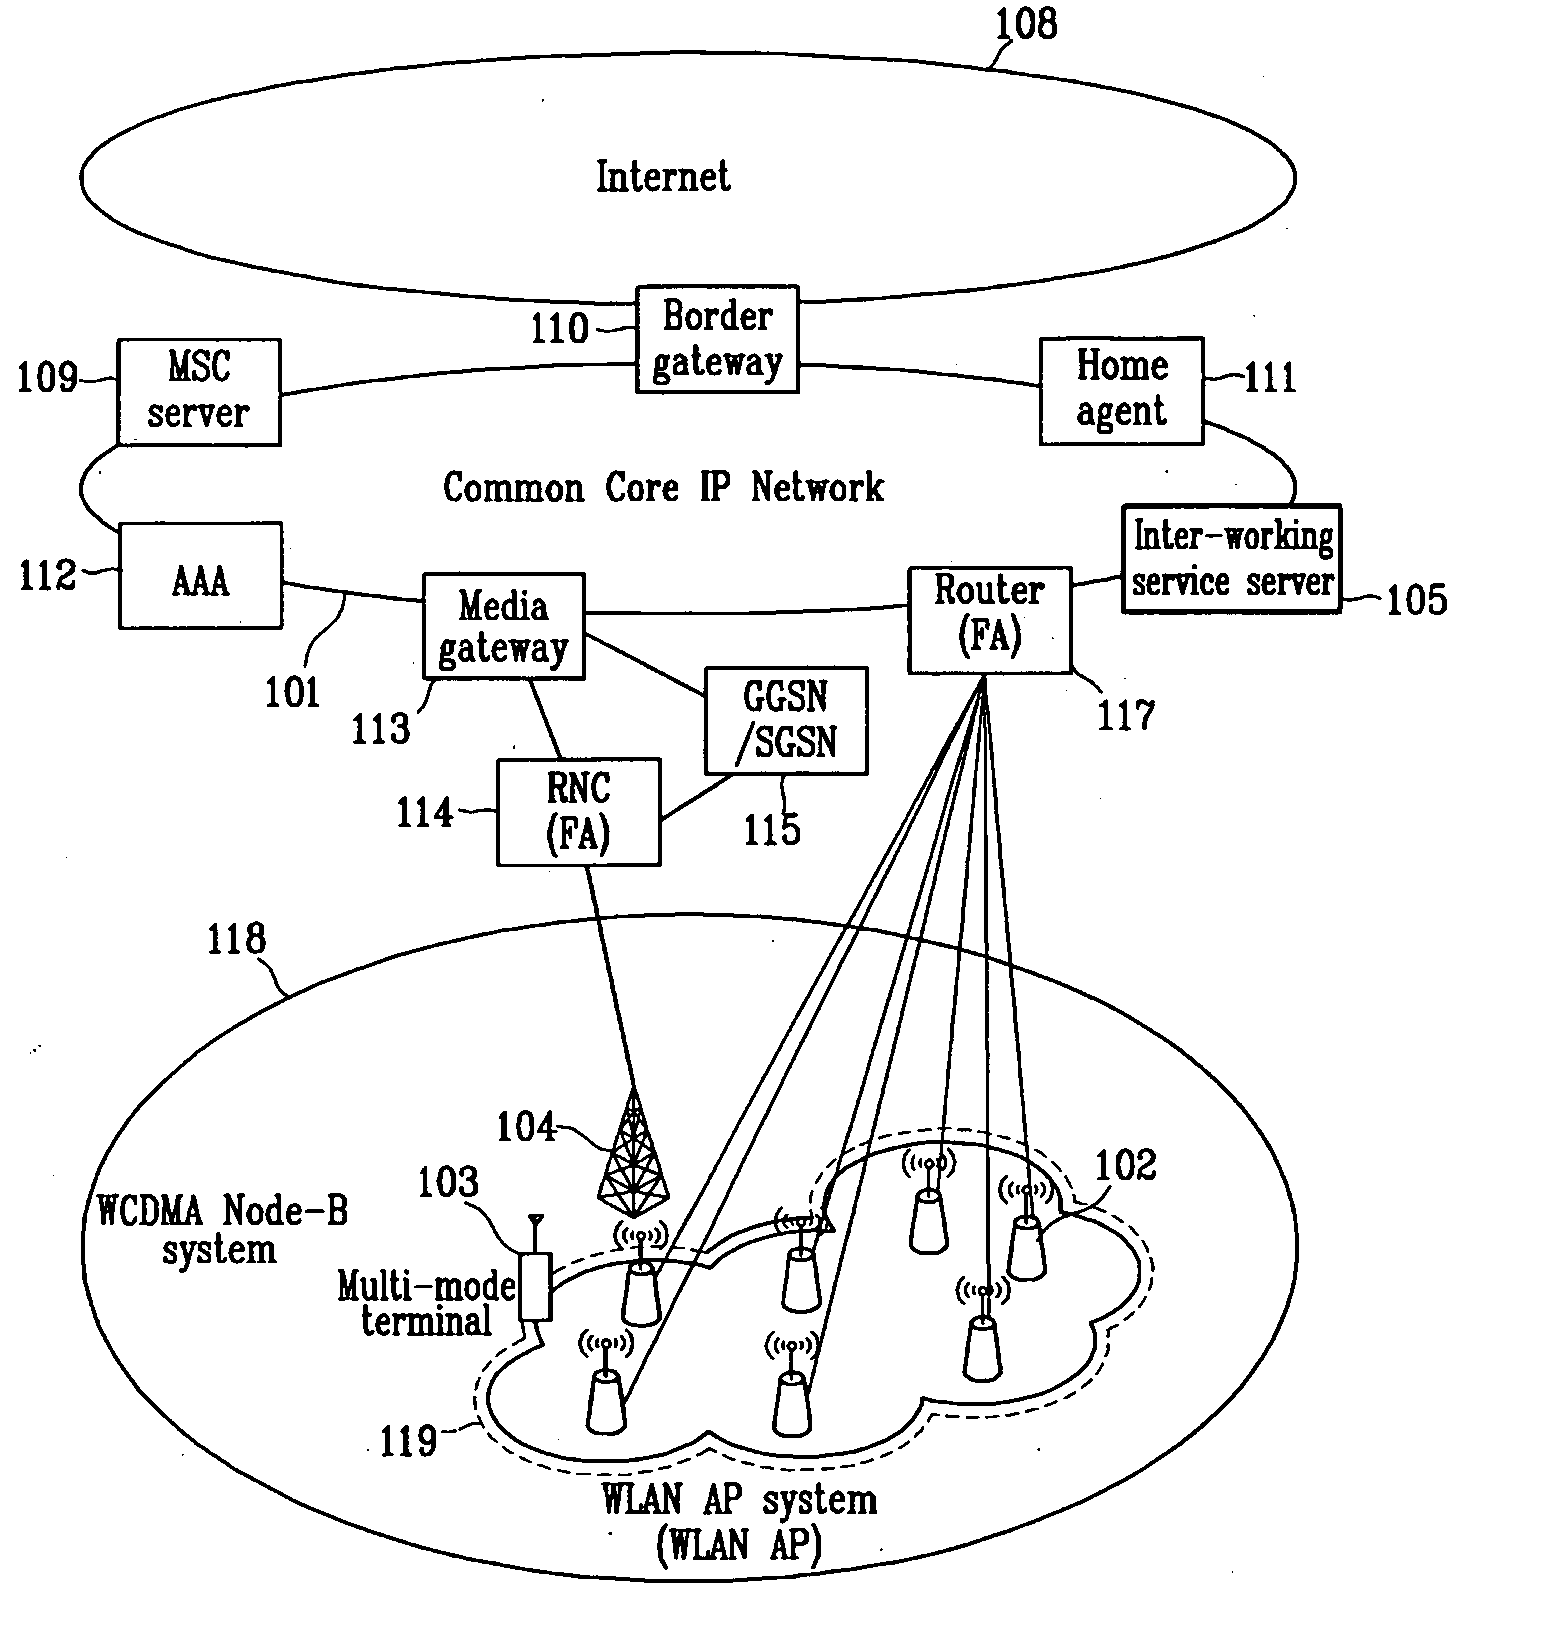 Method for discovering wireless network for inter-system handover, multi-mode terminal unit and inter-working service server using the method